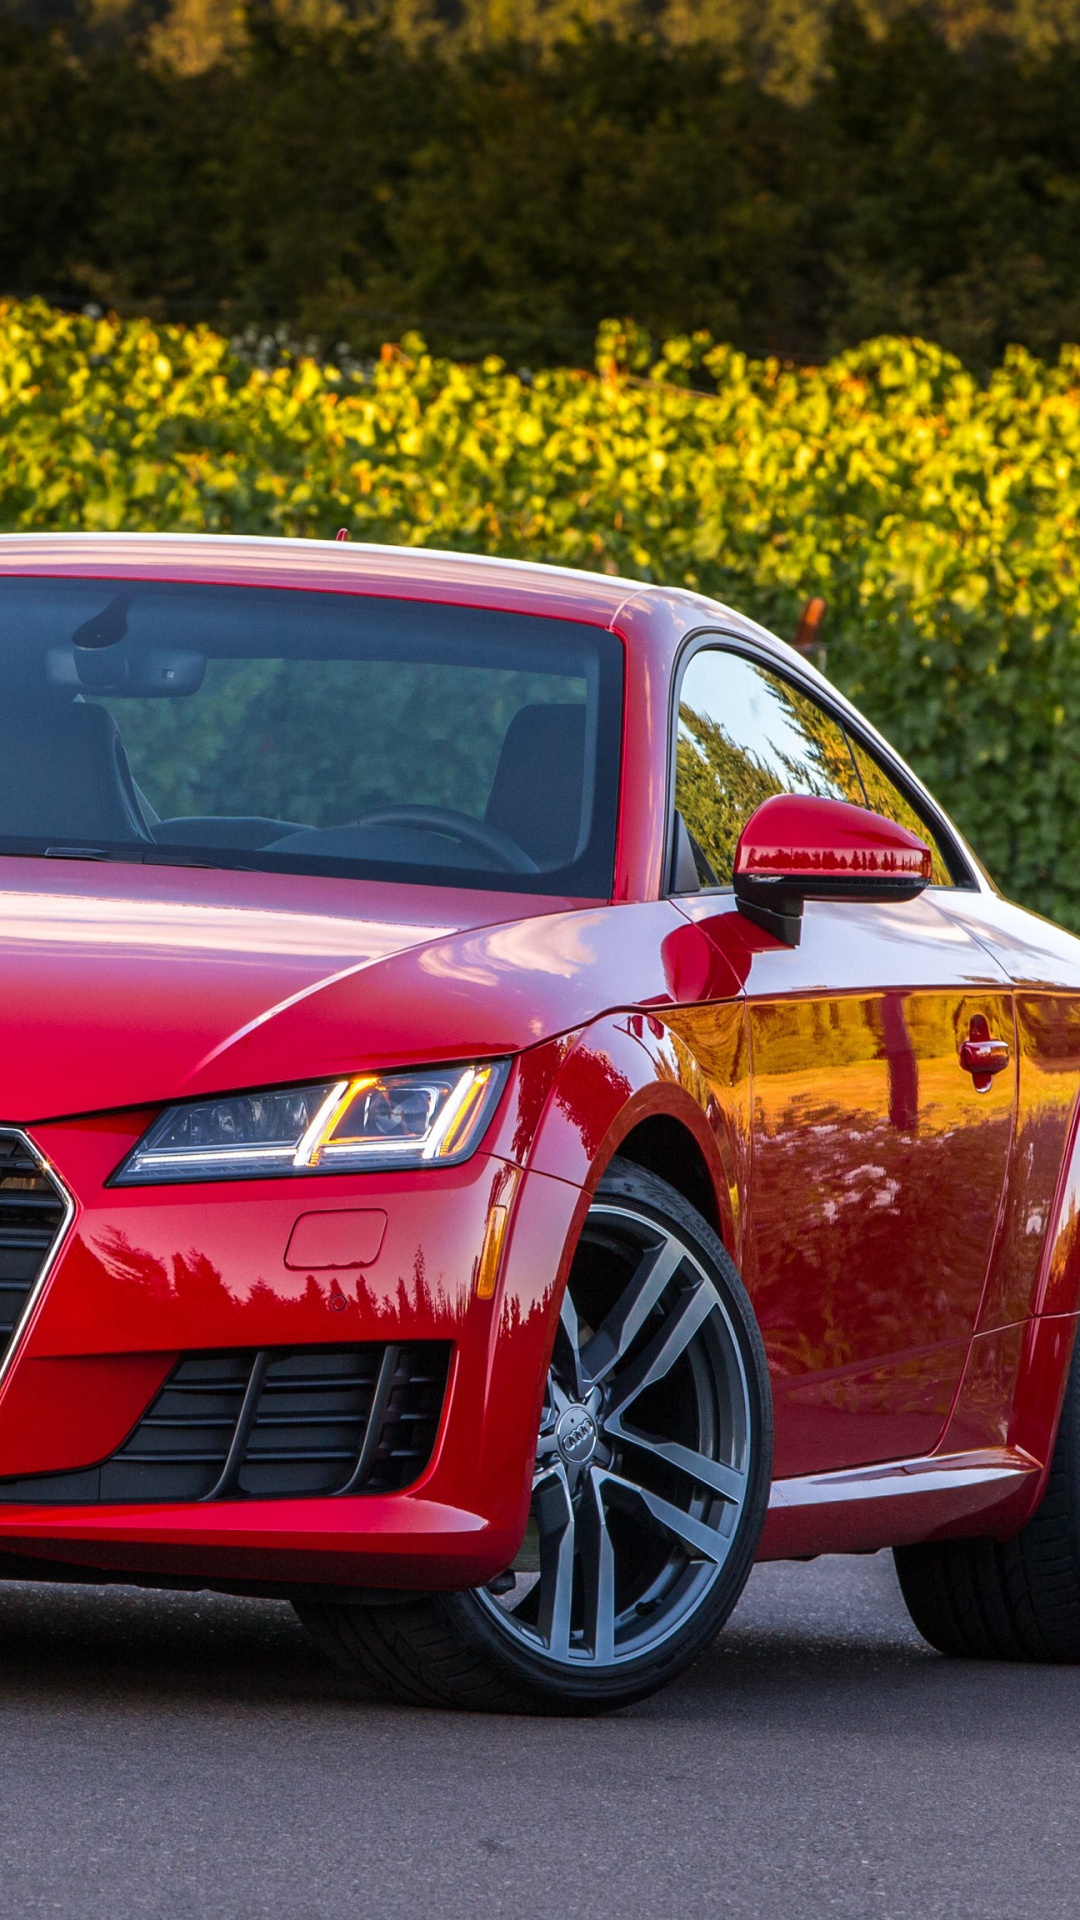 Red Audi Coupe on Road During Daytime. Wallpaper in 1080x1920 Resolution